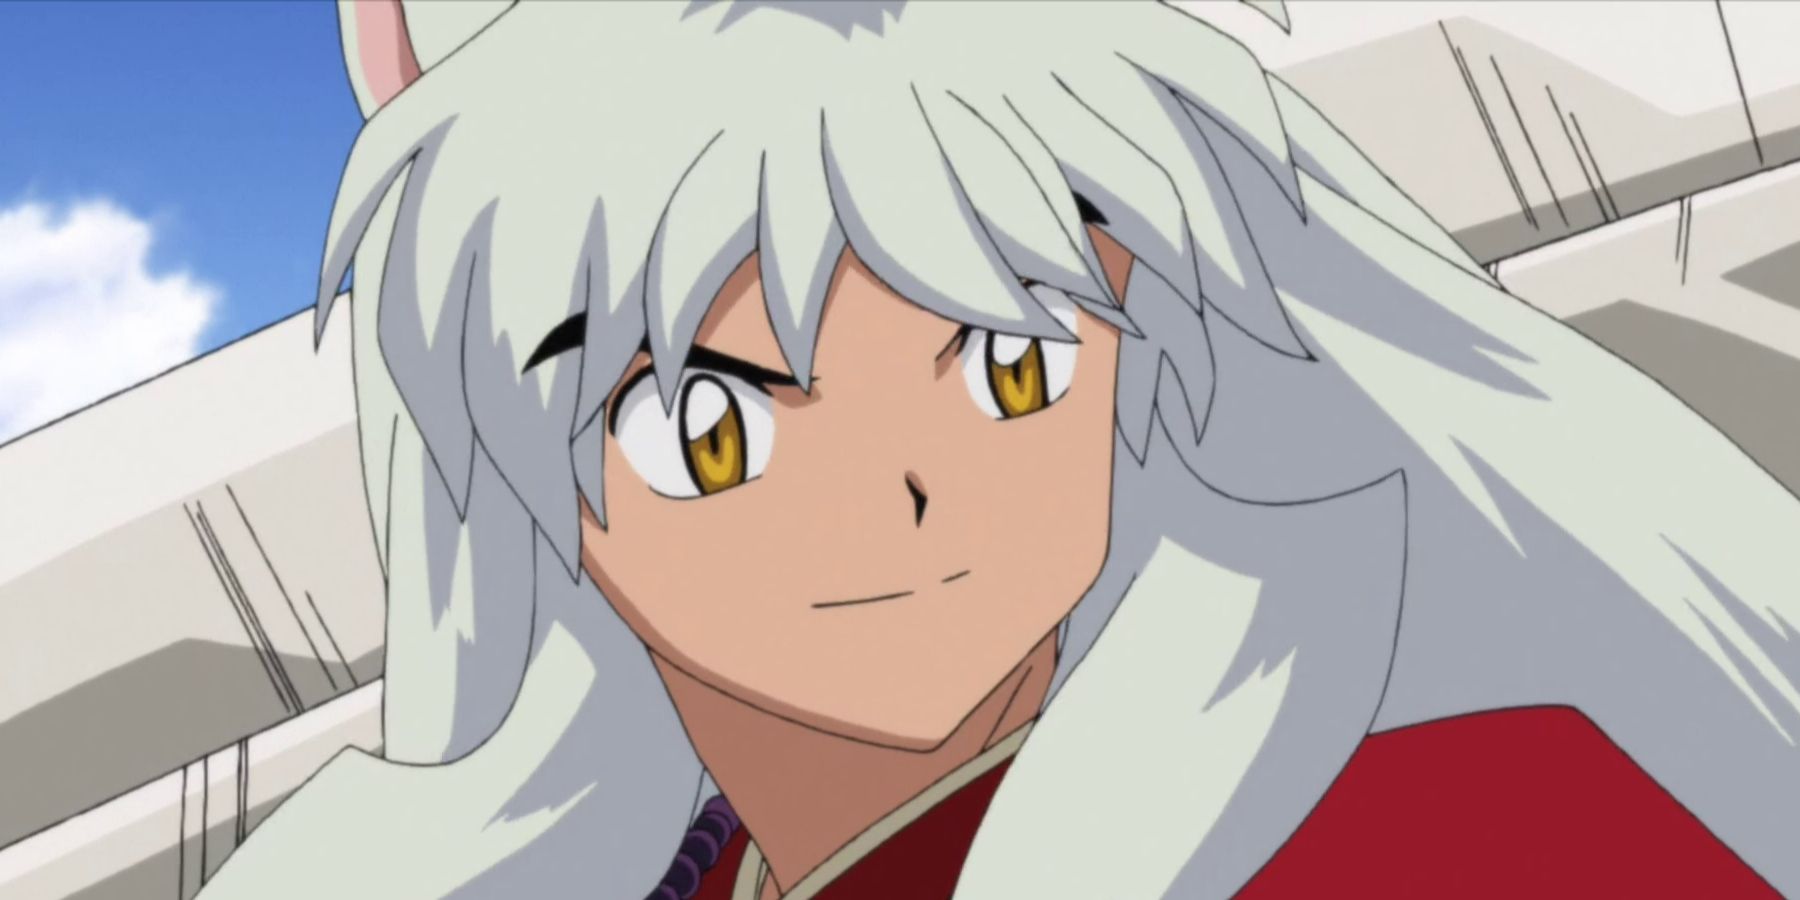 InuYasha with his weapon